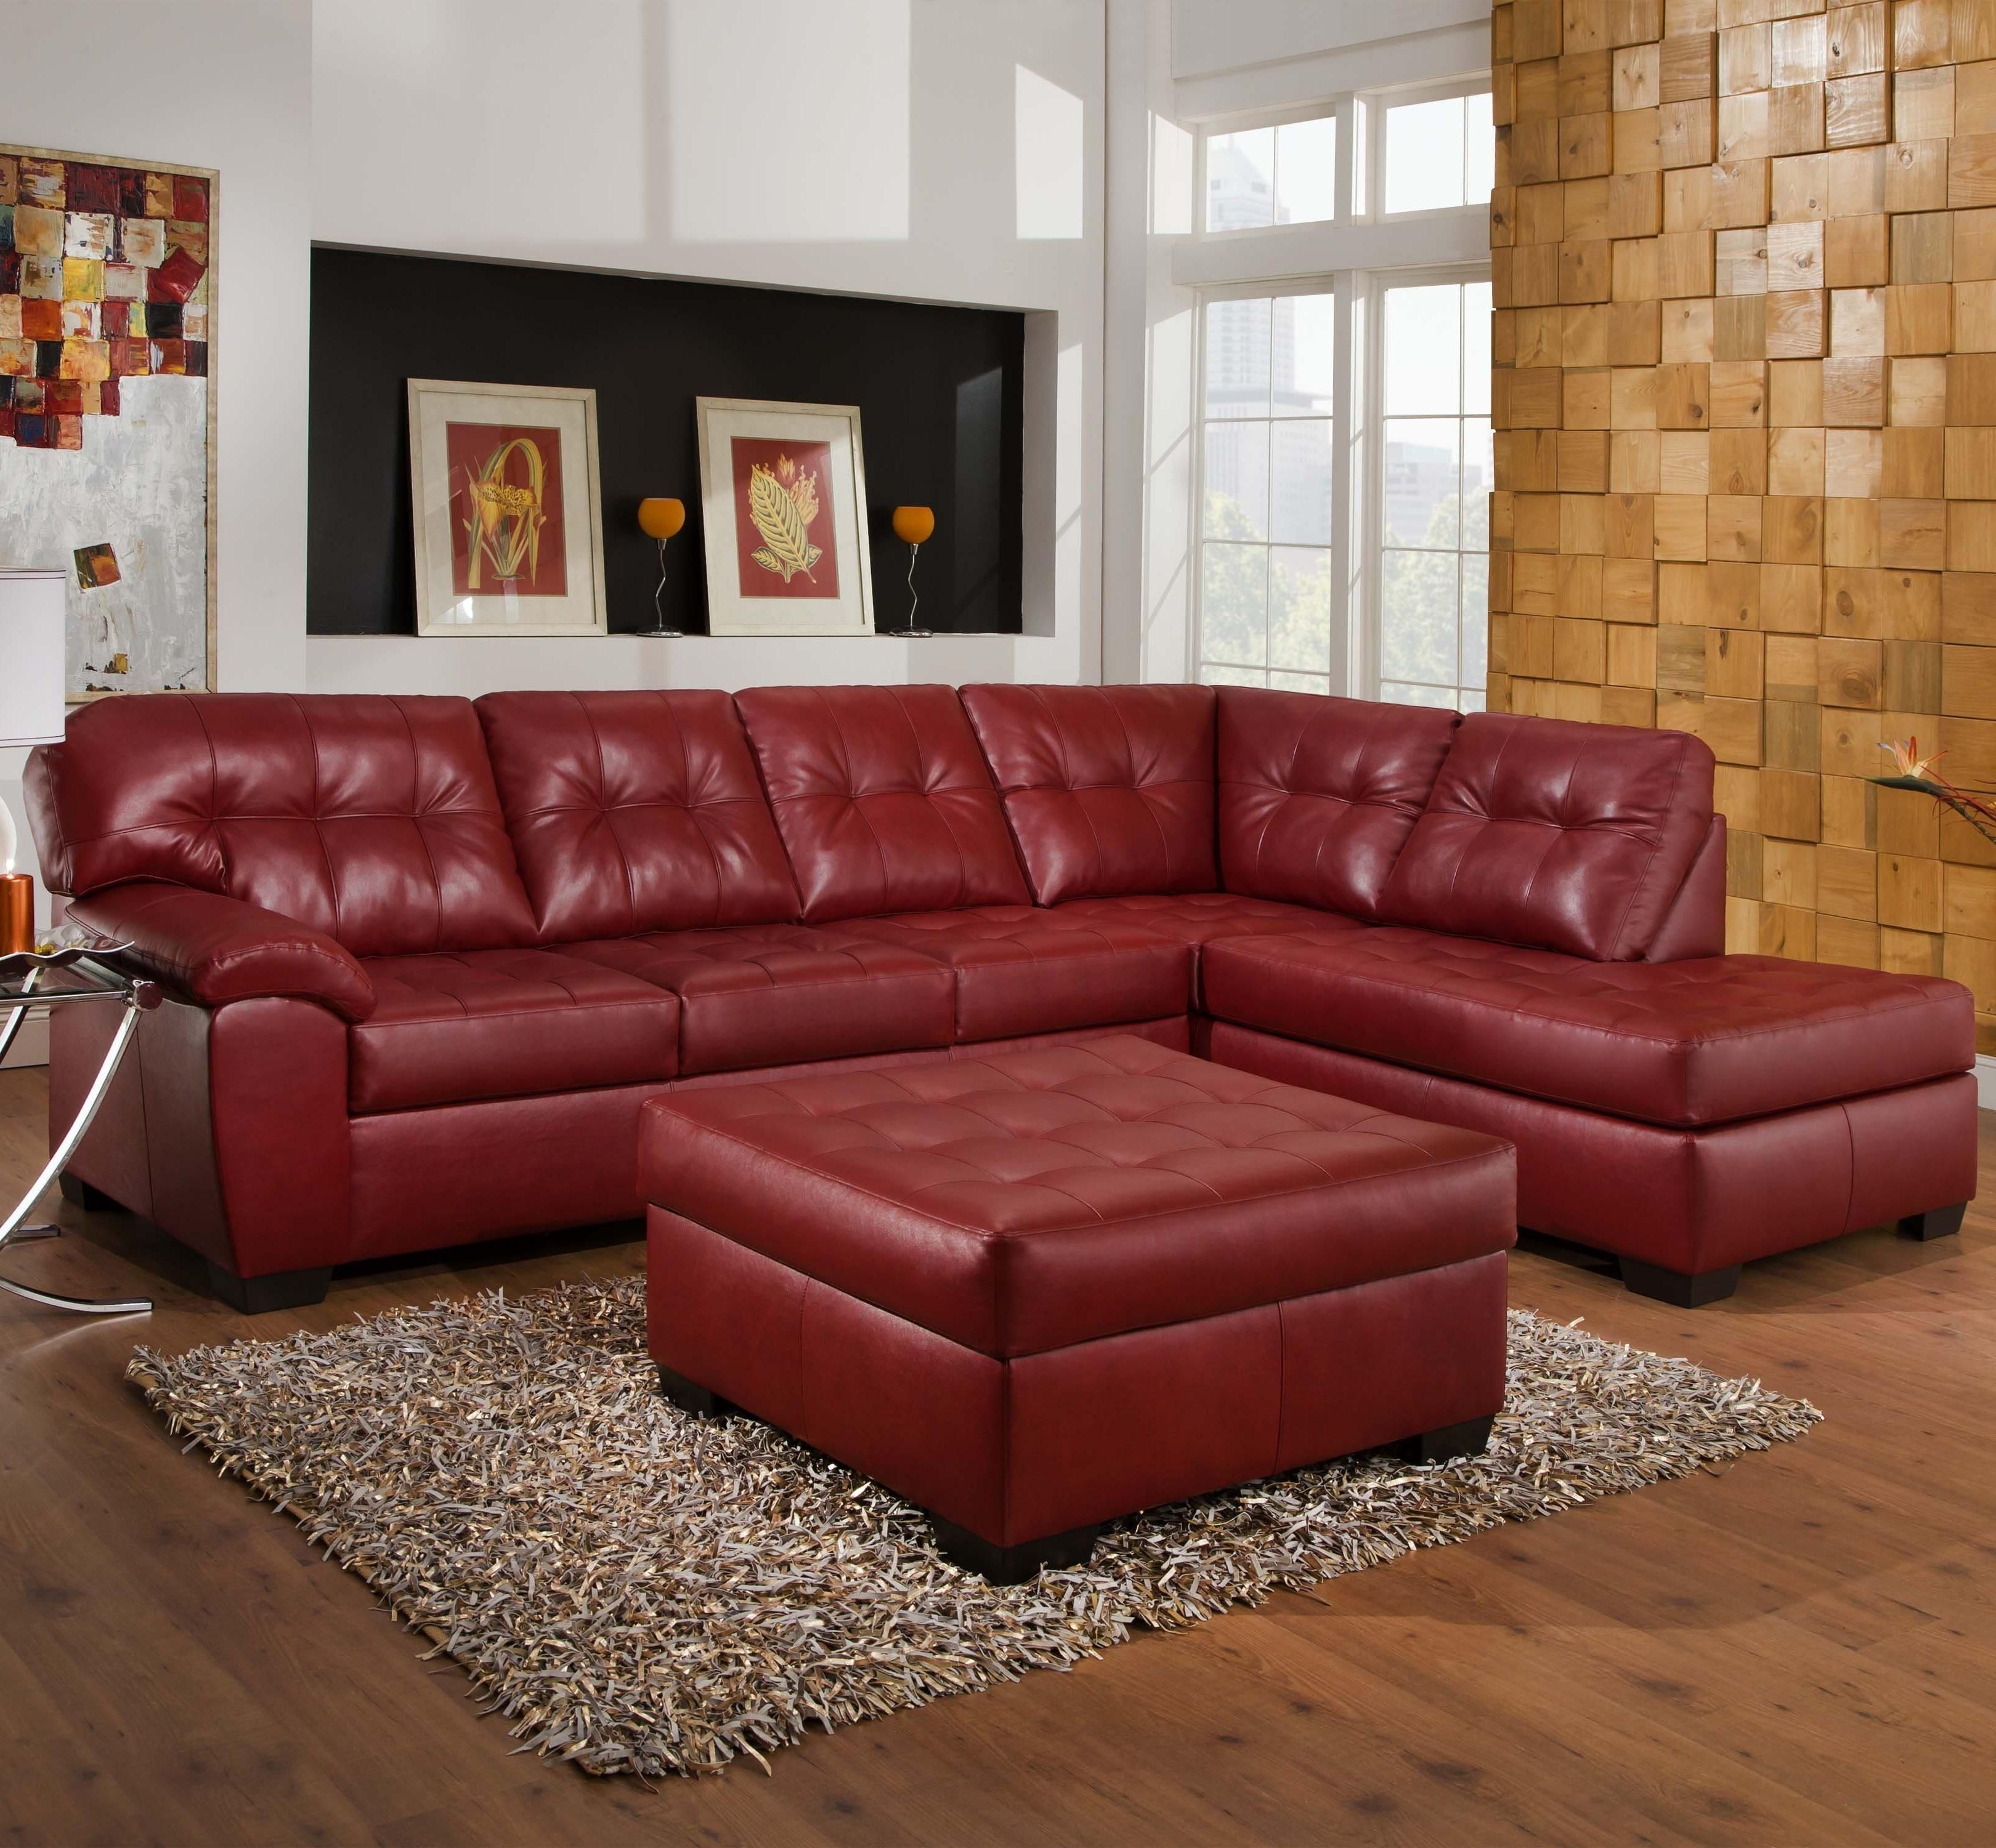 9569 2 Piece Sectional With Tufted Seats & Backsimmons With Regard To Memphis Tn Sectional Sofas (View 8 of 10)